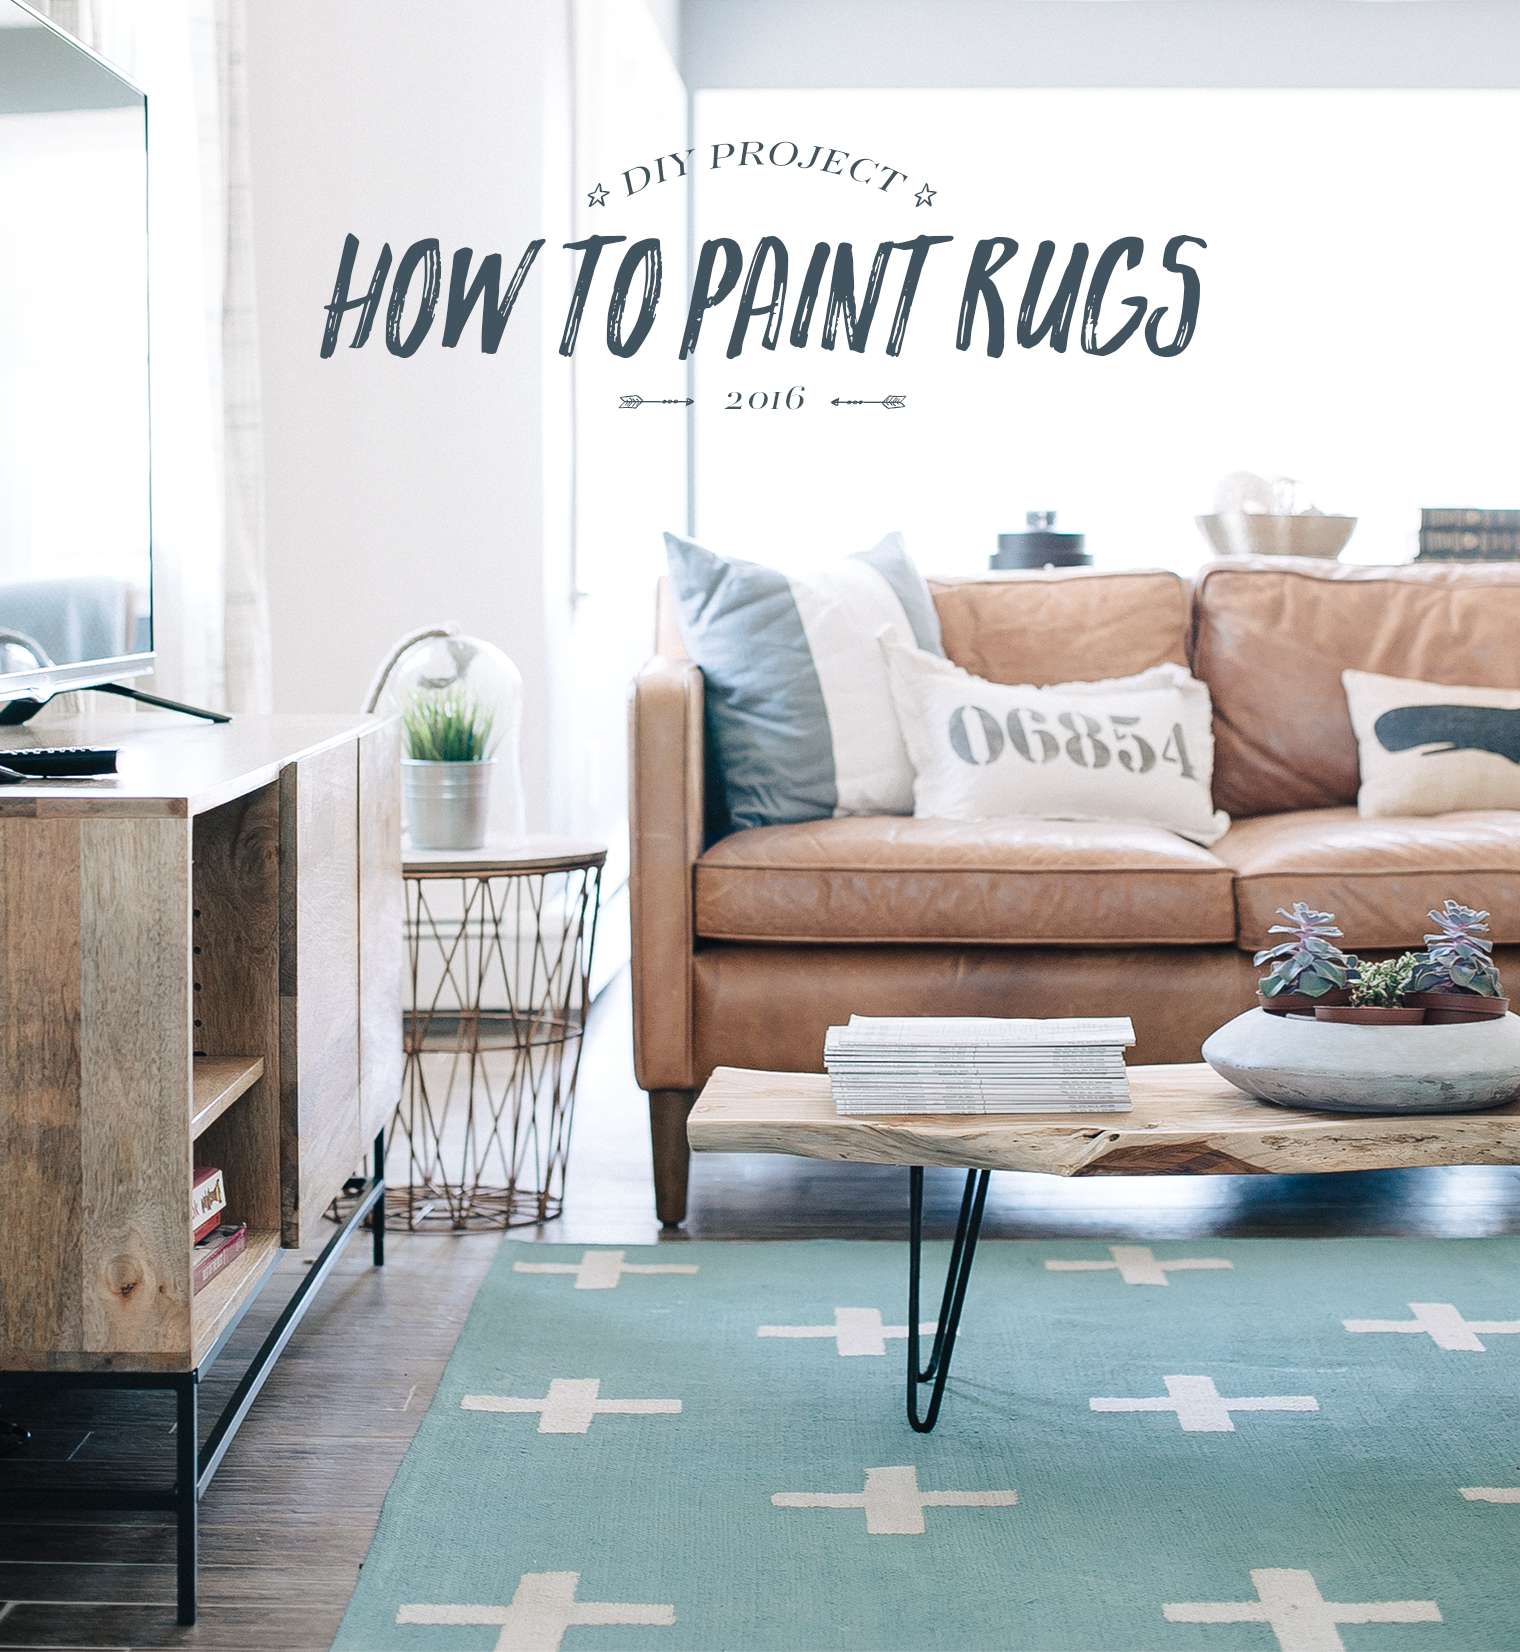 DIY-Painted-Patterned-Rugs-Project-How-To-1